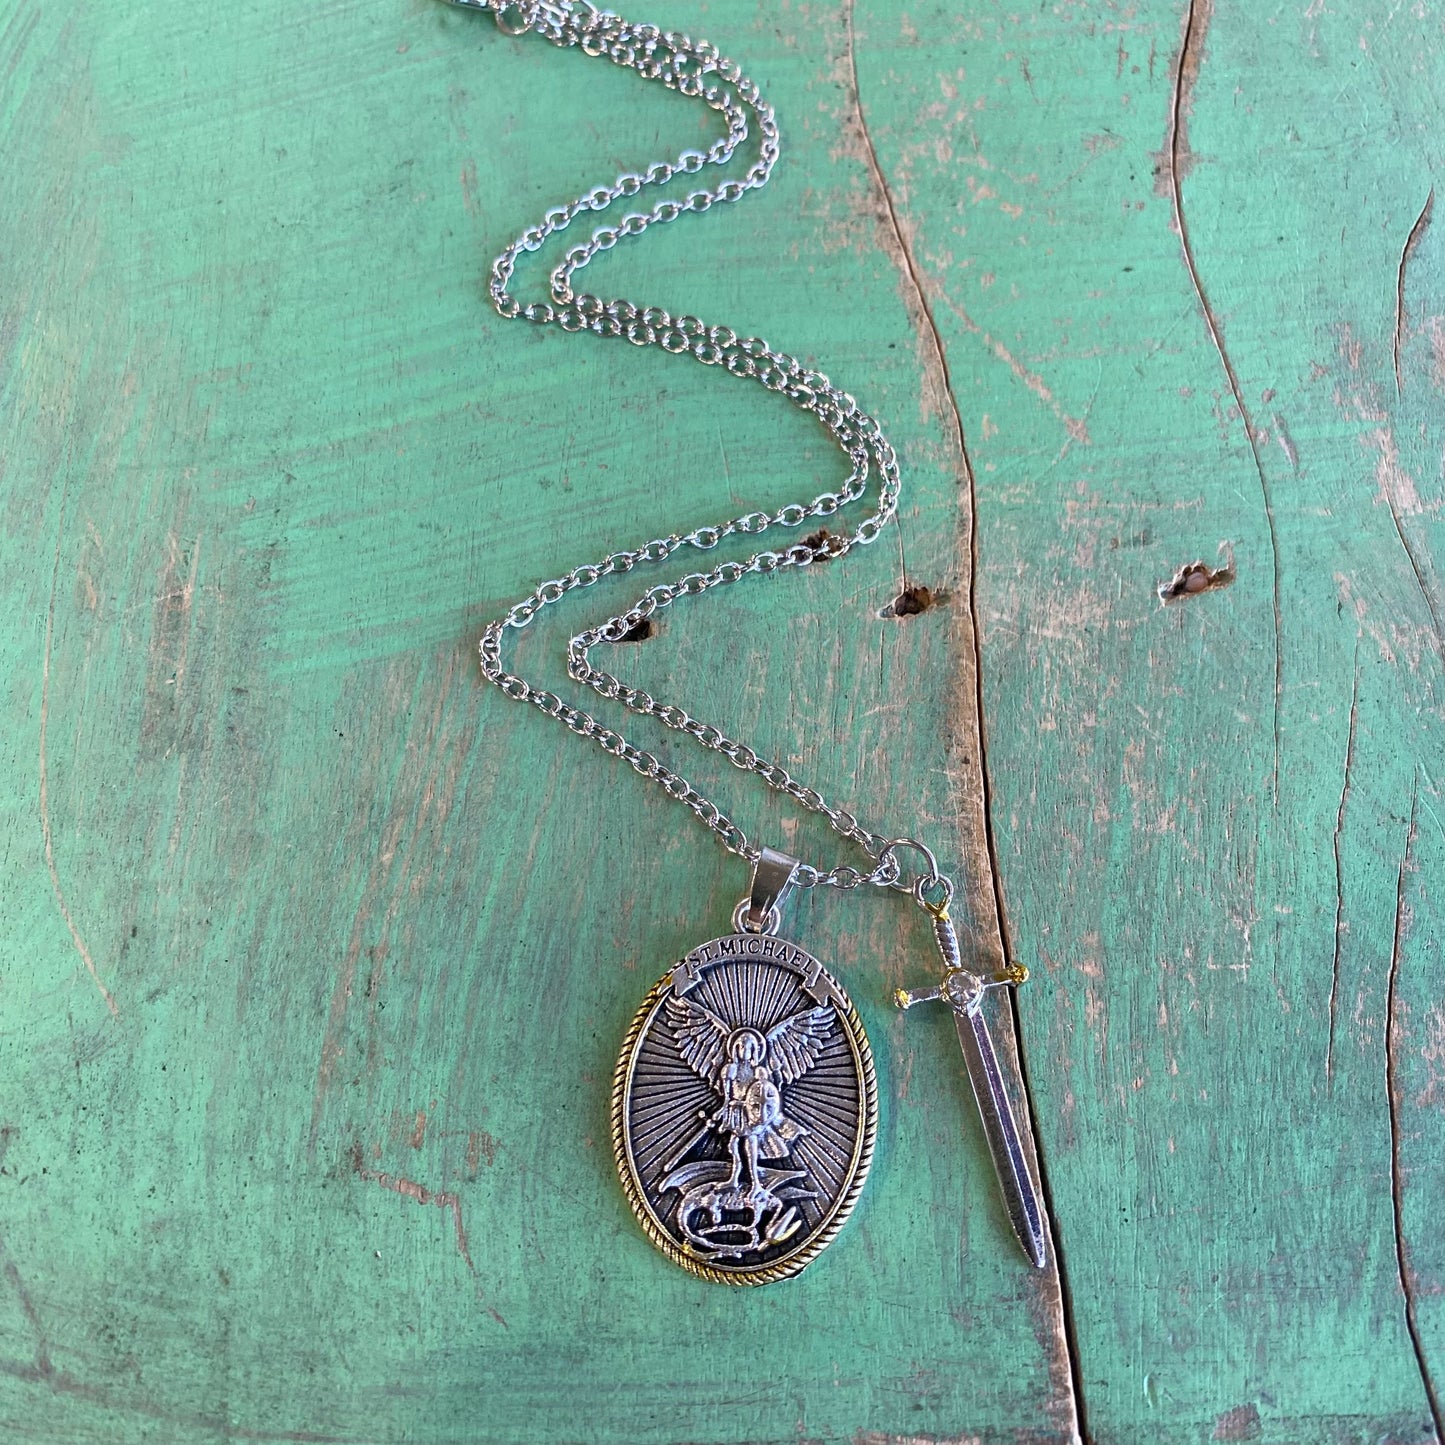 Sword of St Michael Necklace